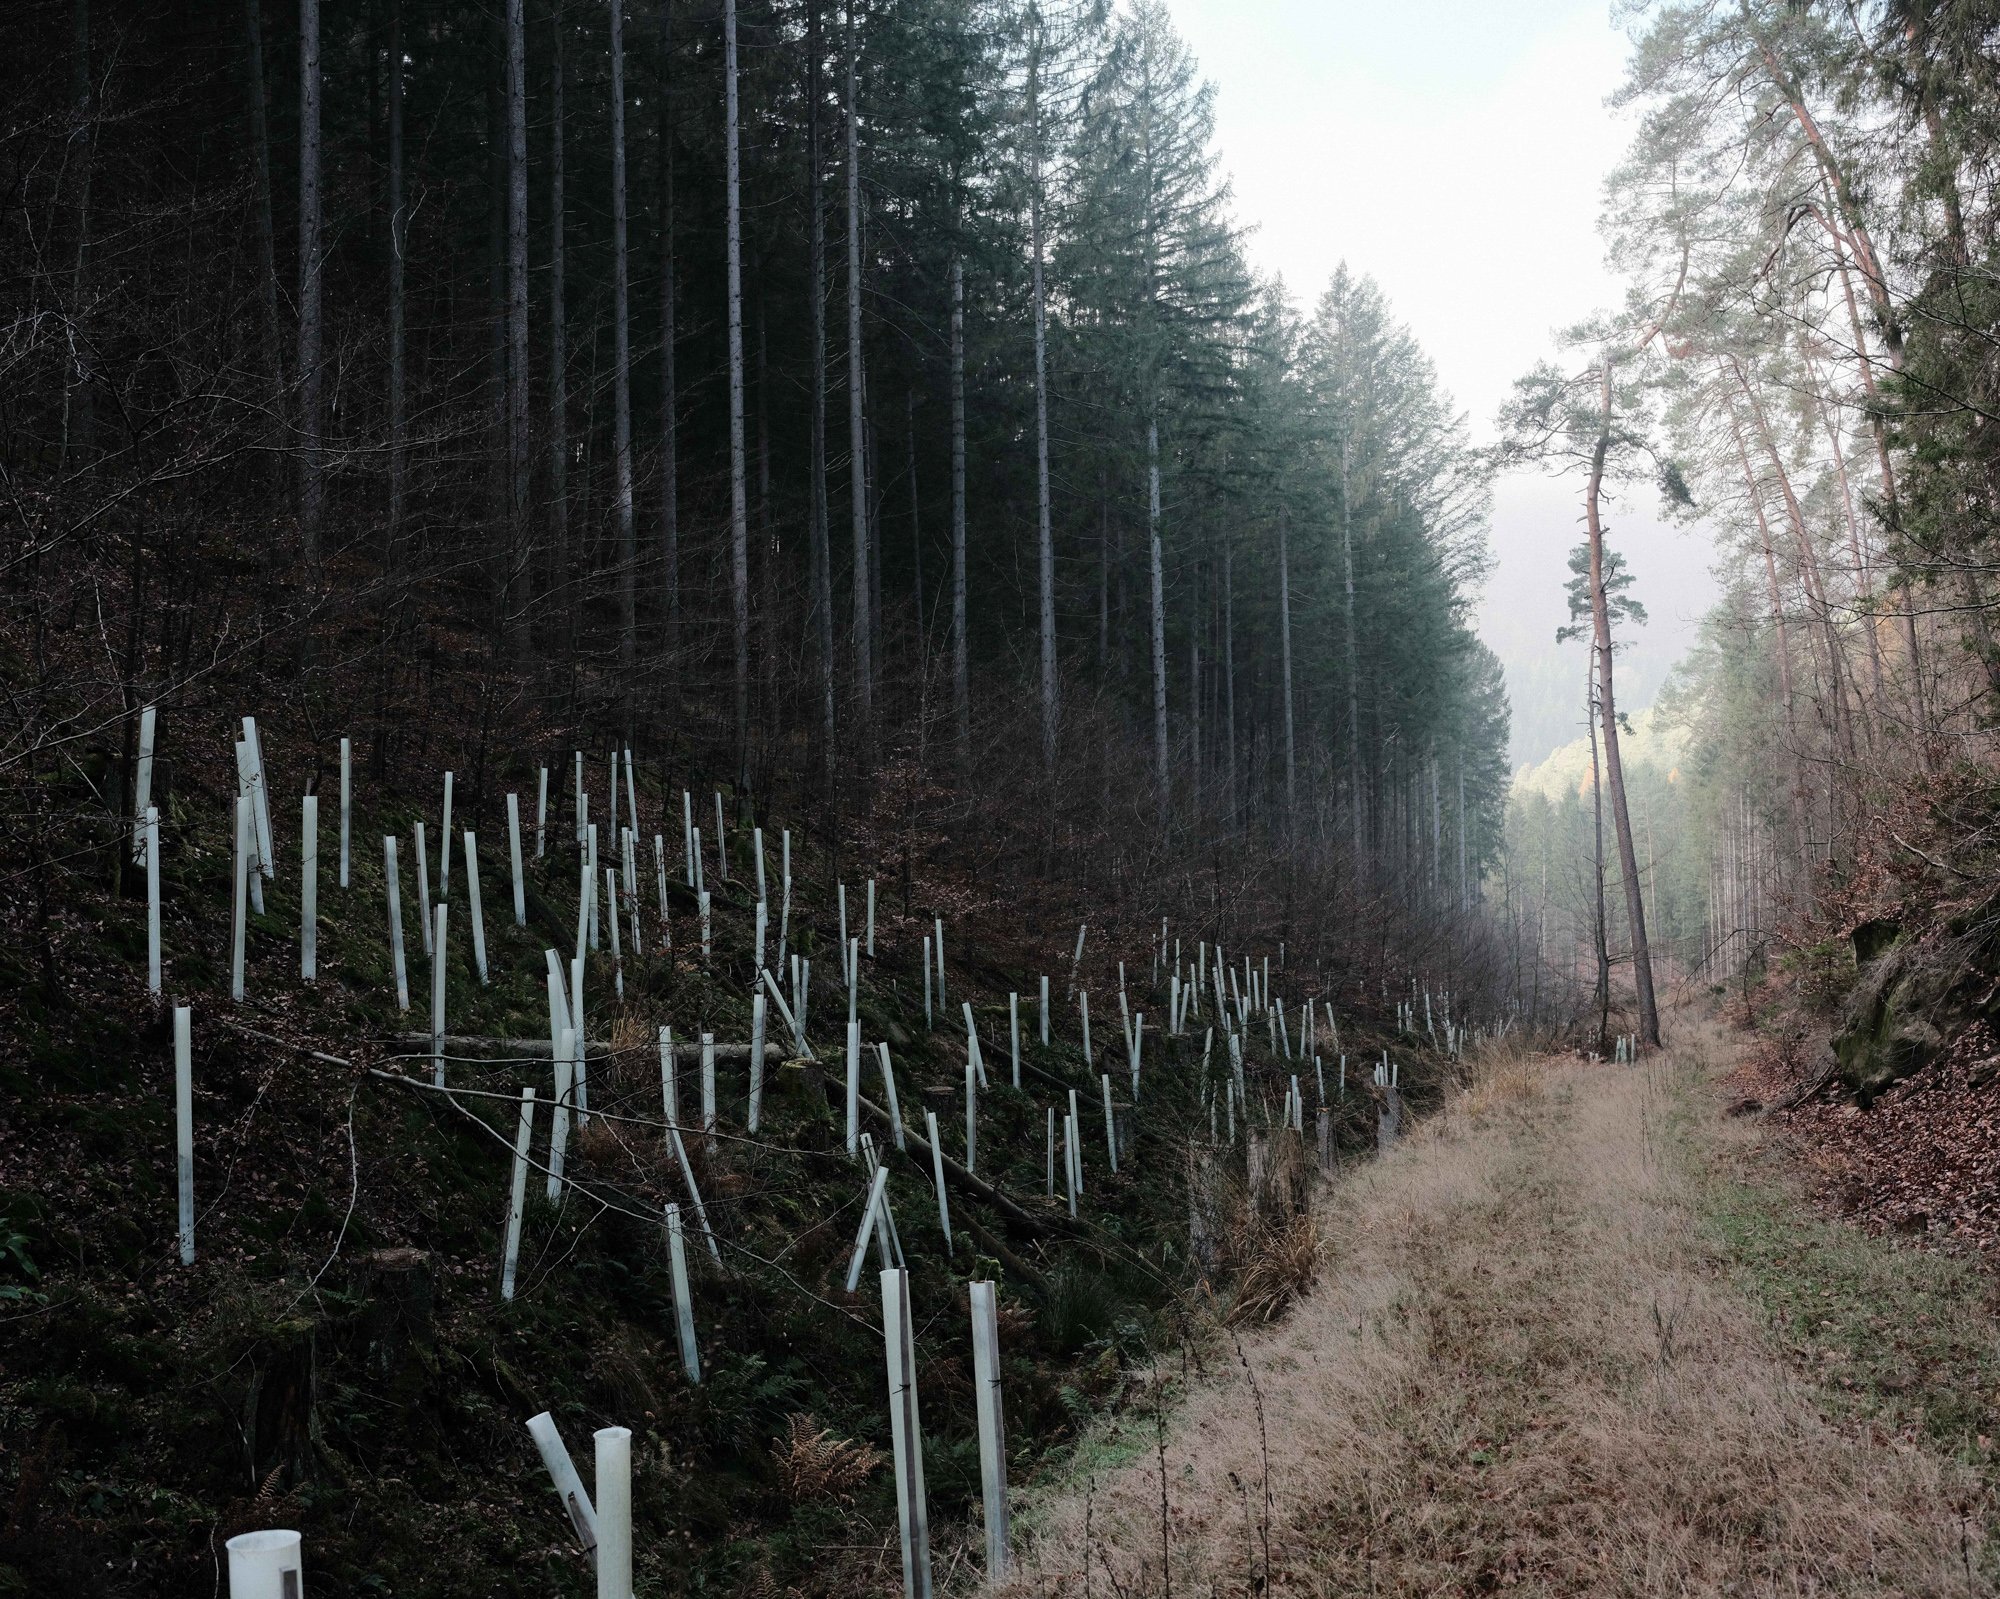  Forest plantation to diversify the forest and lessening the number of pine trees. In turn creating ecocorridors between France and Germany. Palatinate forest, Germany. 